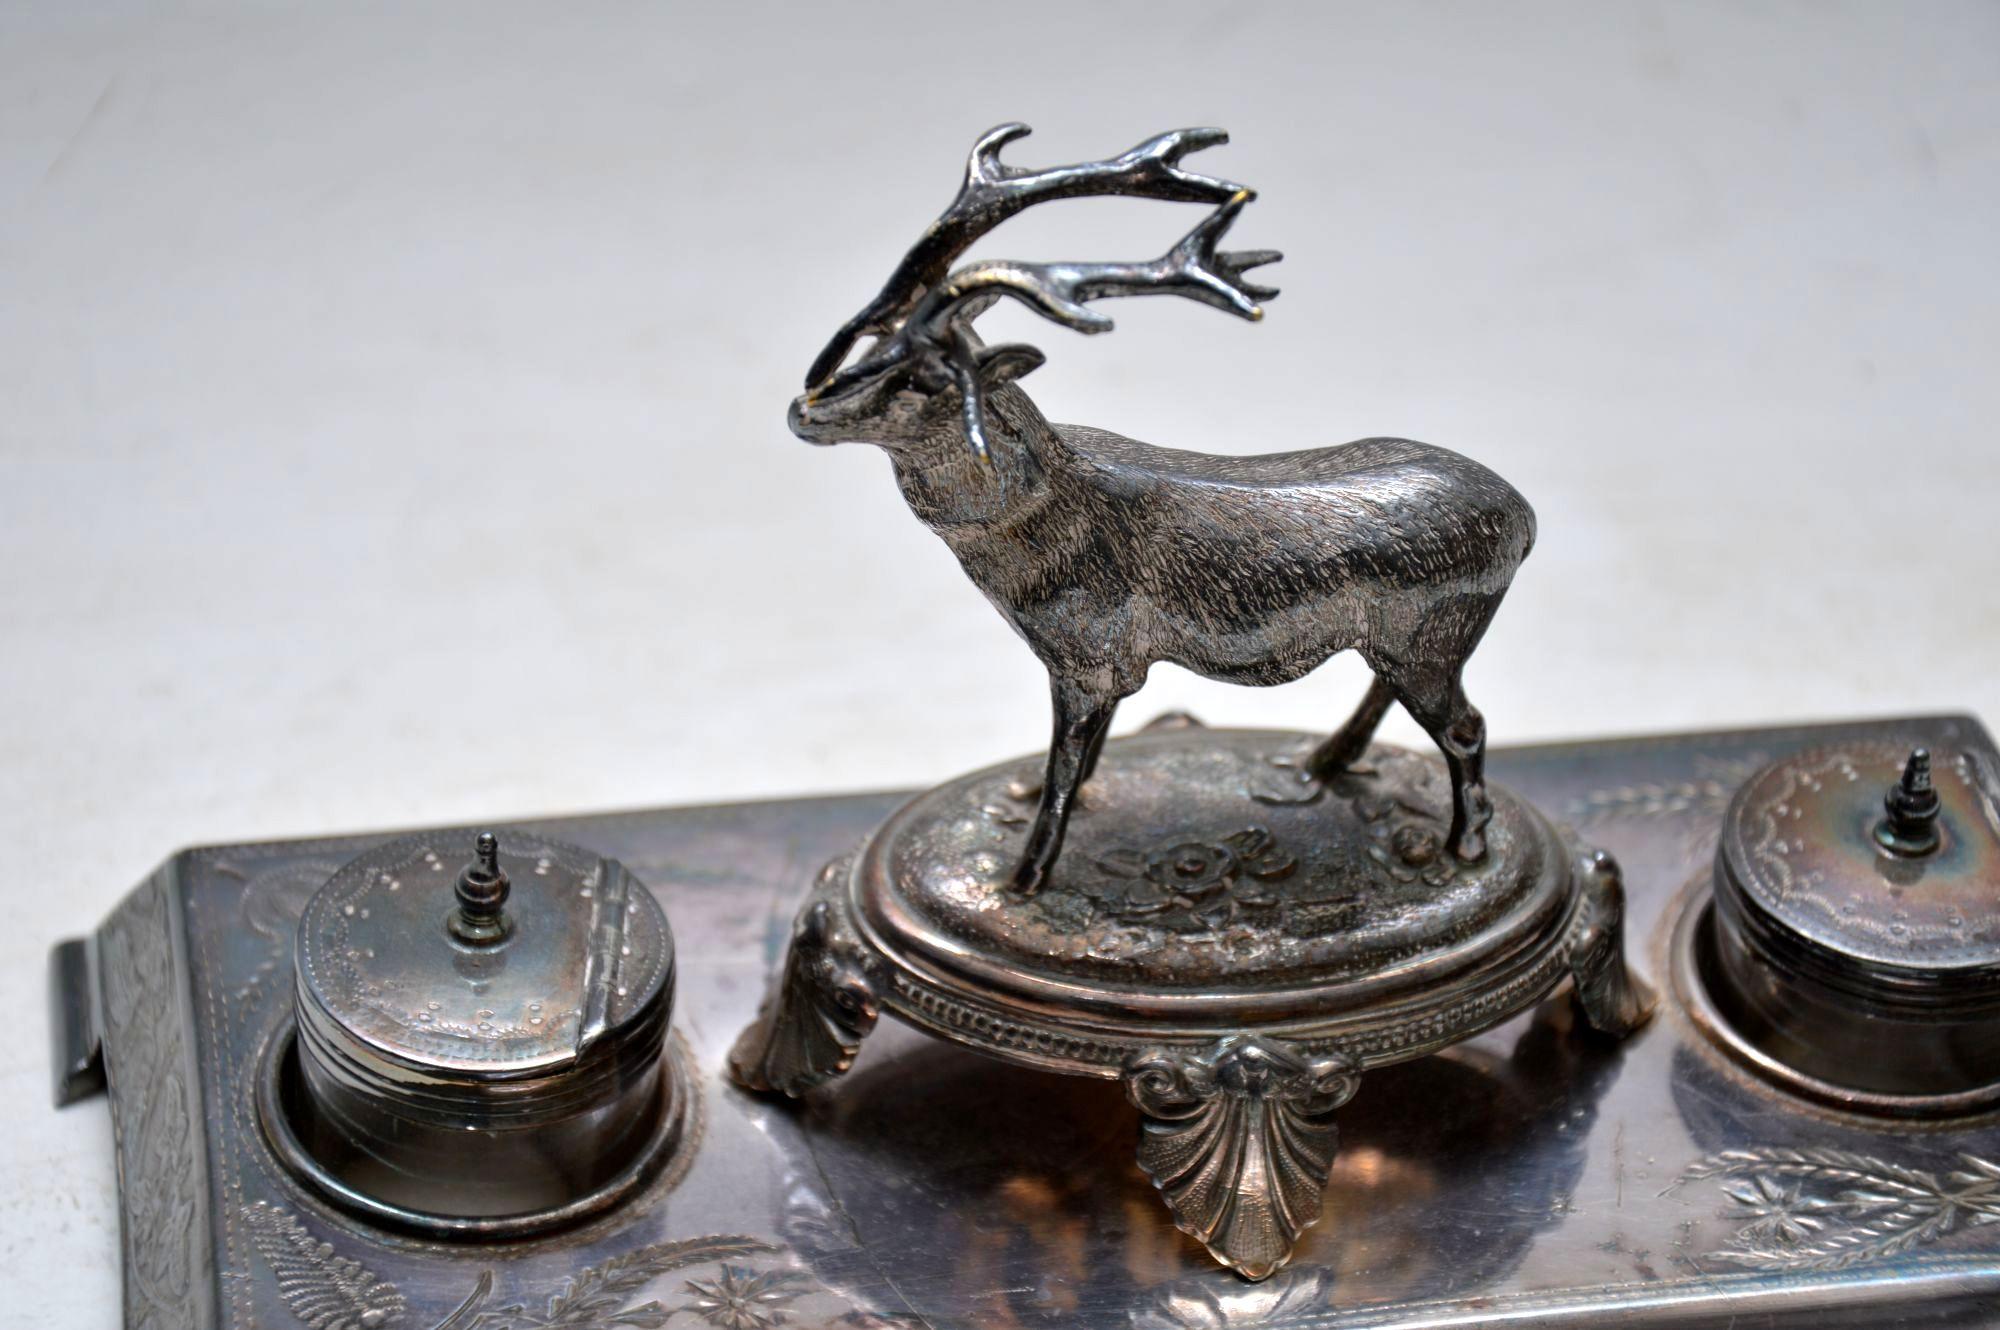 Late Victorian Antique Silver Plate Stag Inkwell Stand by James Deakin